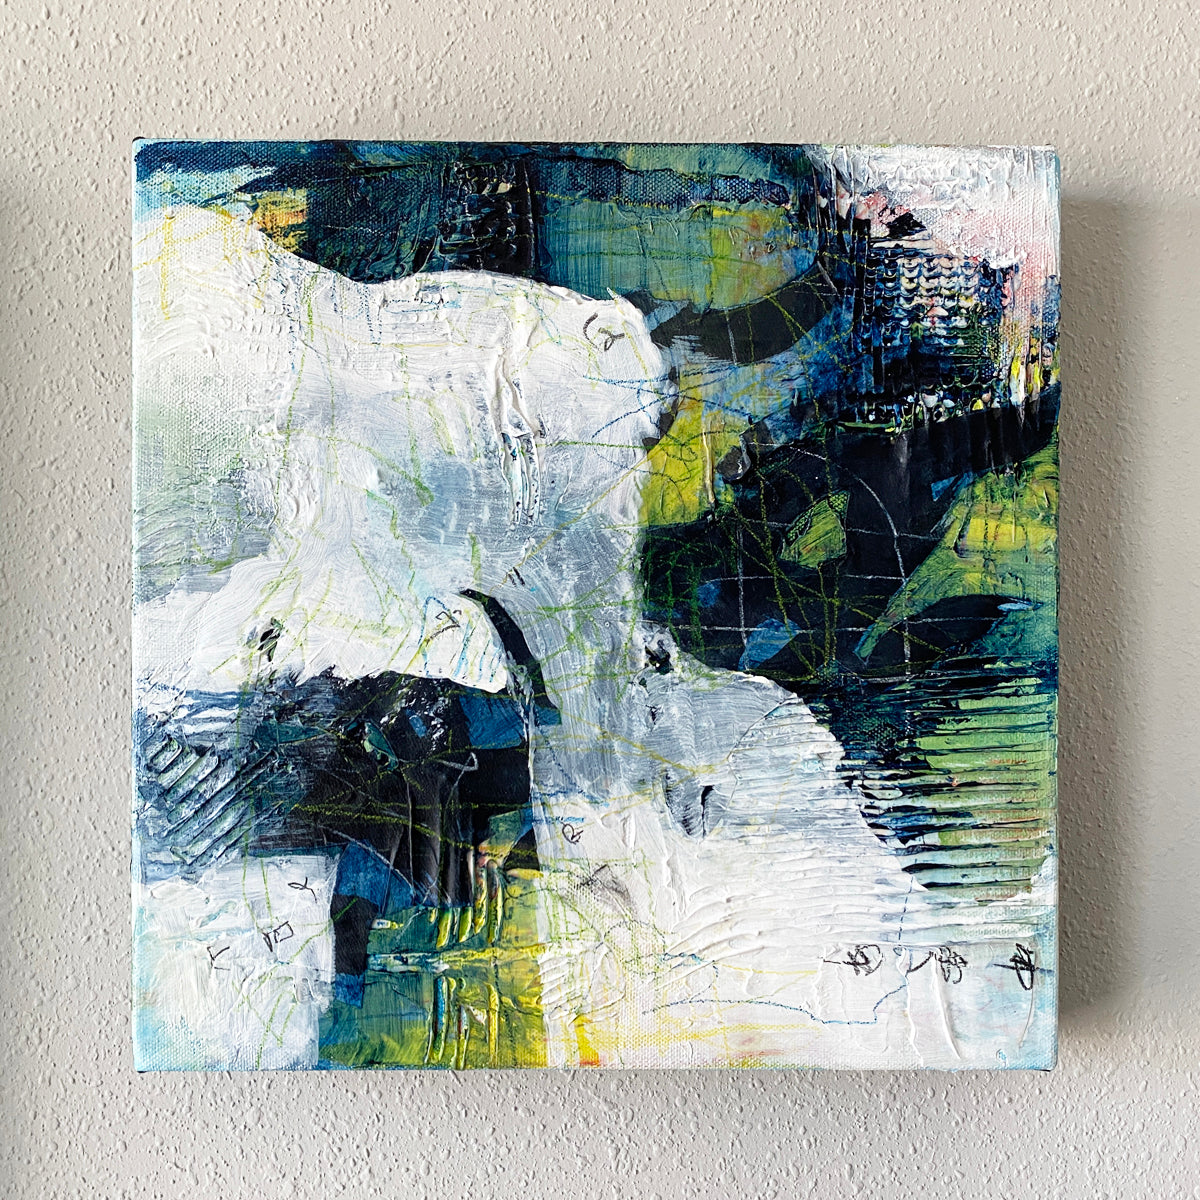 Echoes of Presence | 12"x12"